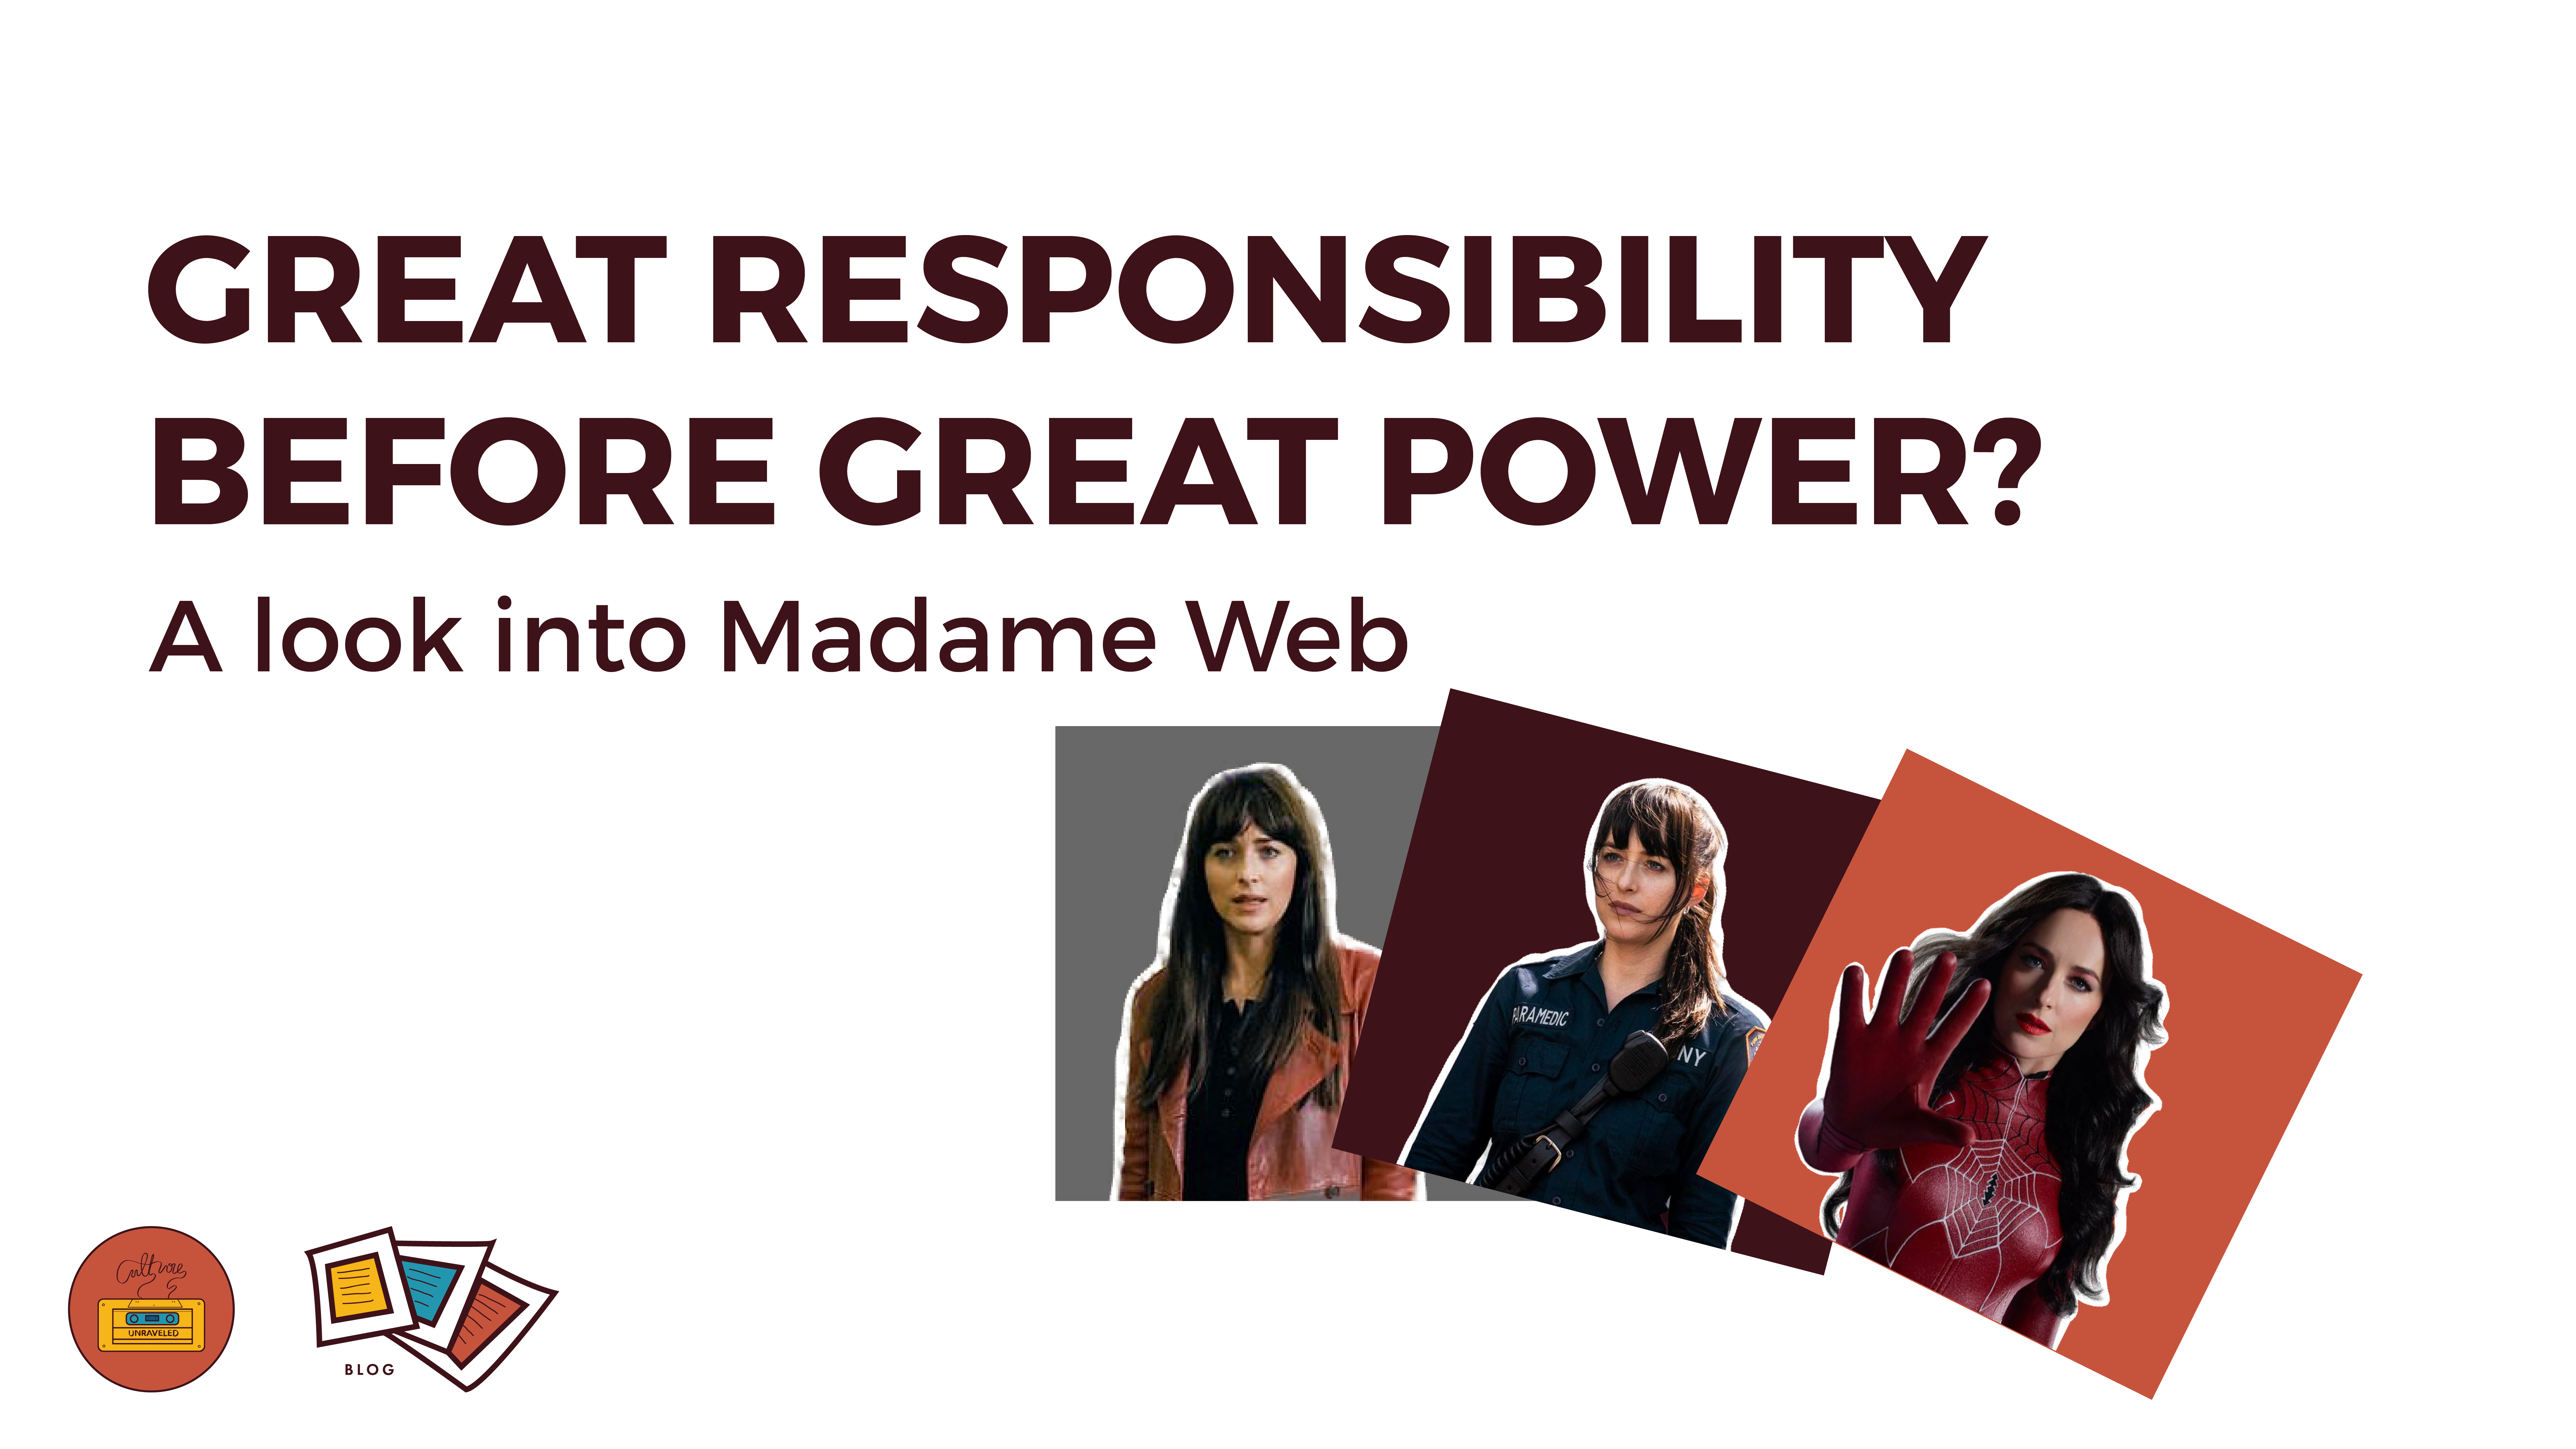 Great responsibility before great power? A look into Madame Web